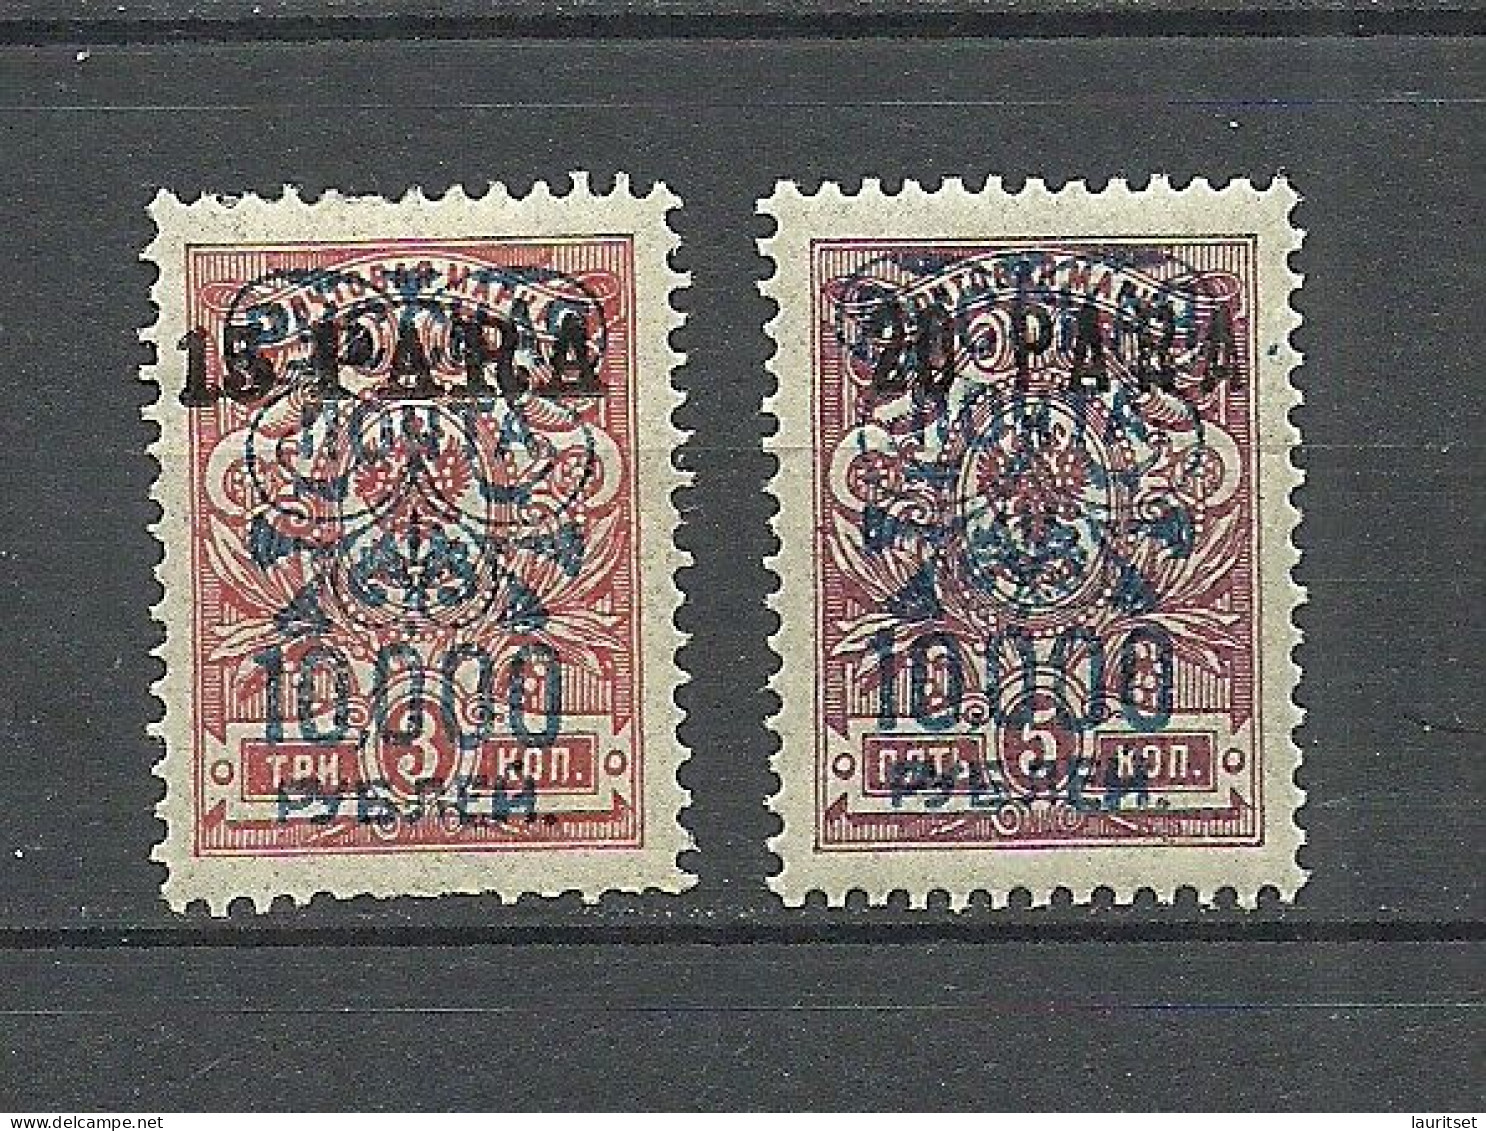 RUSSLAND 1920 Civil War Wrangel Army Camp Post At Gallipoli On Levante Levant OPT Stamps * - Wrangel-Armee